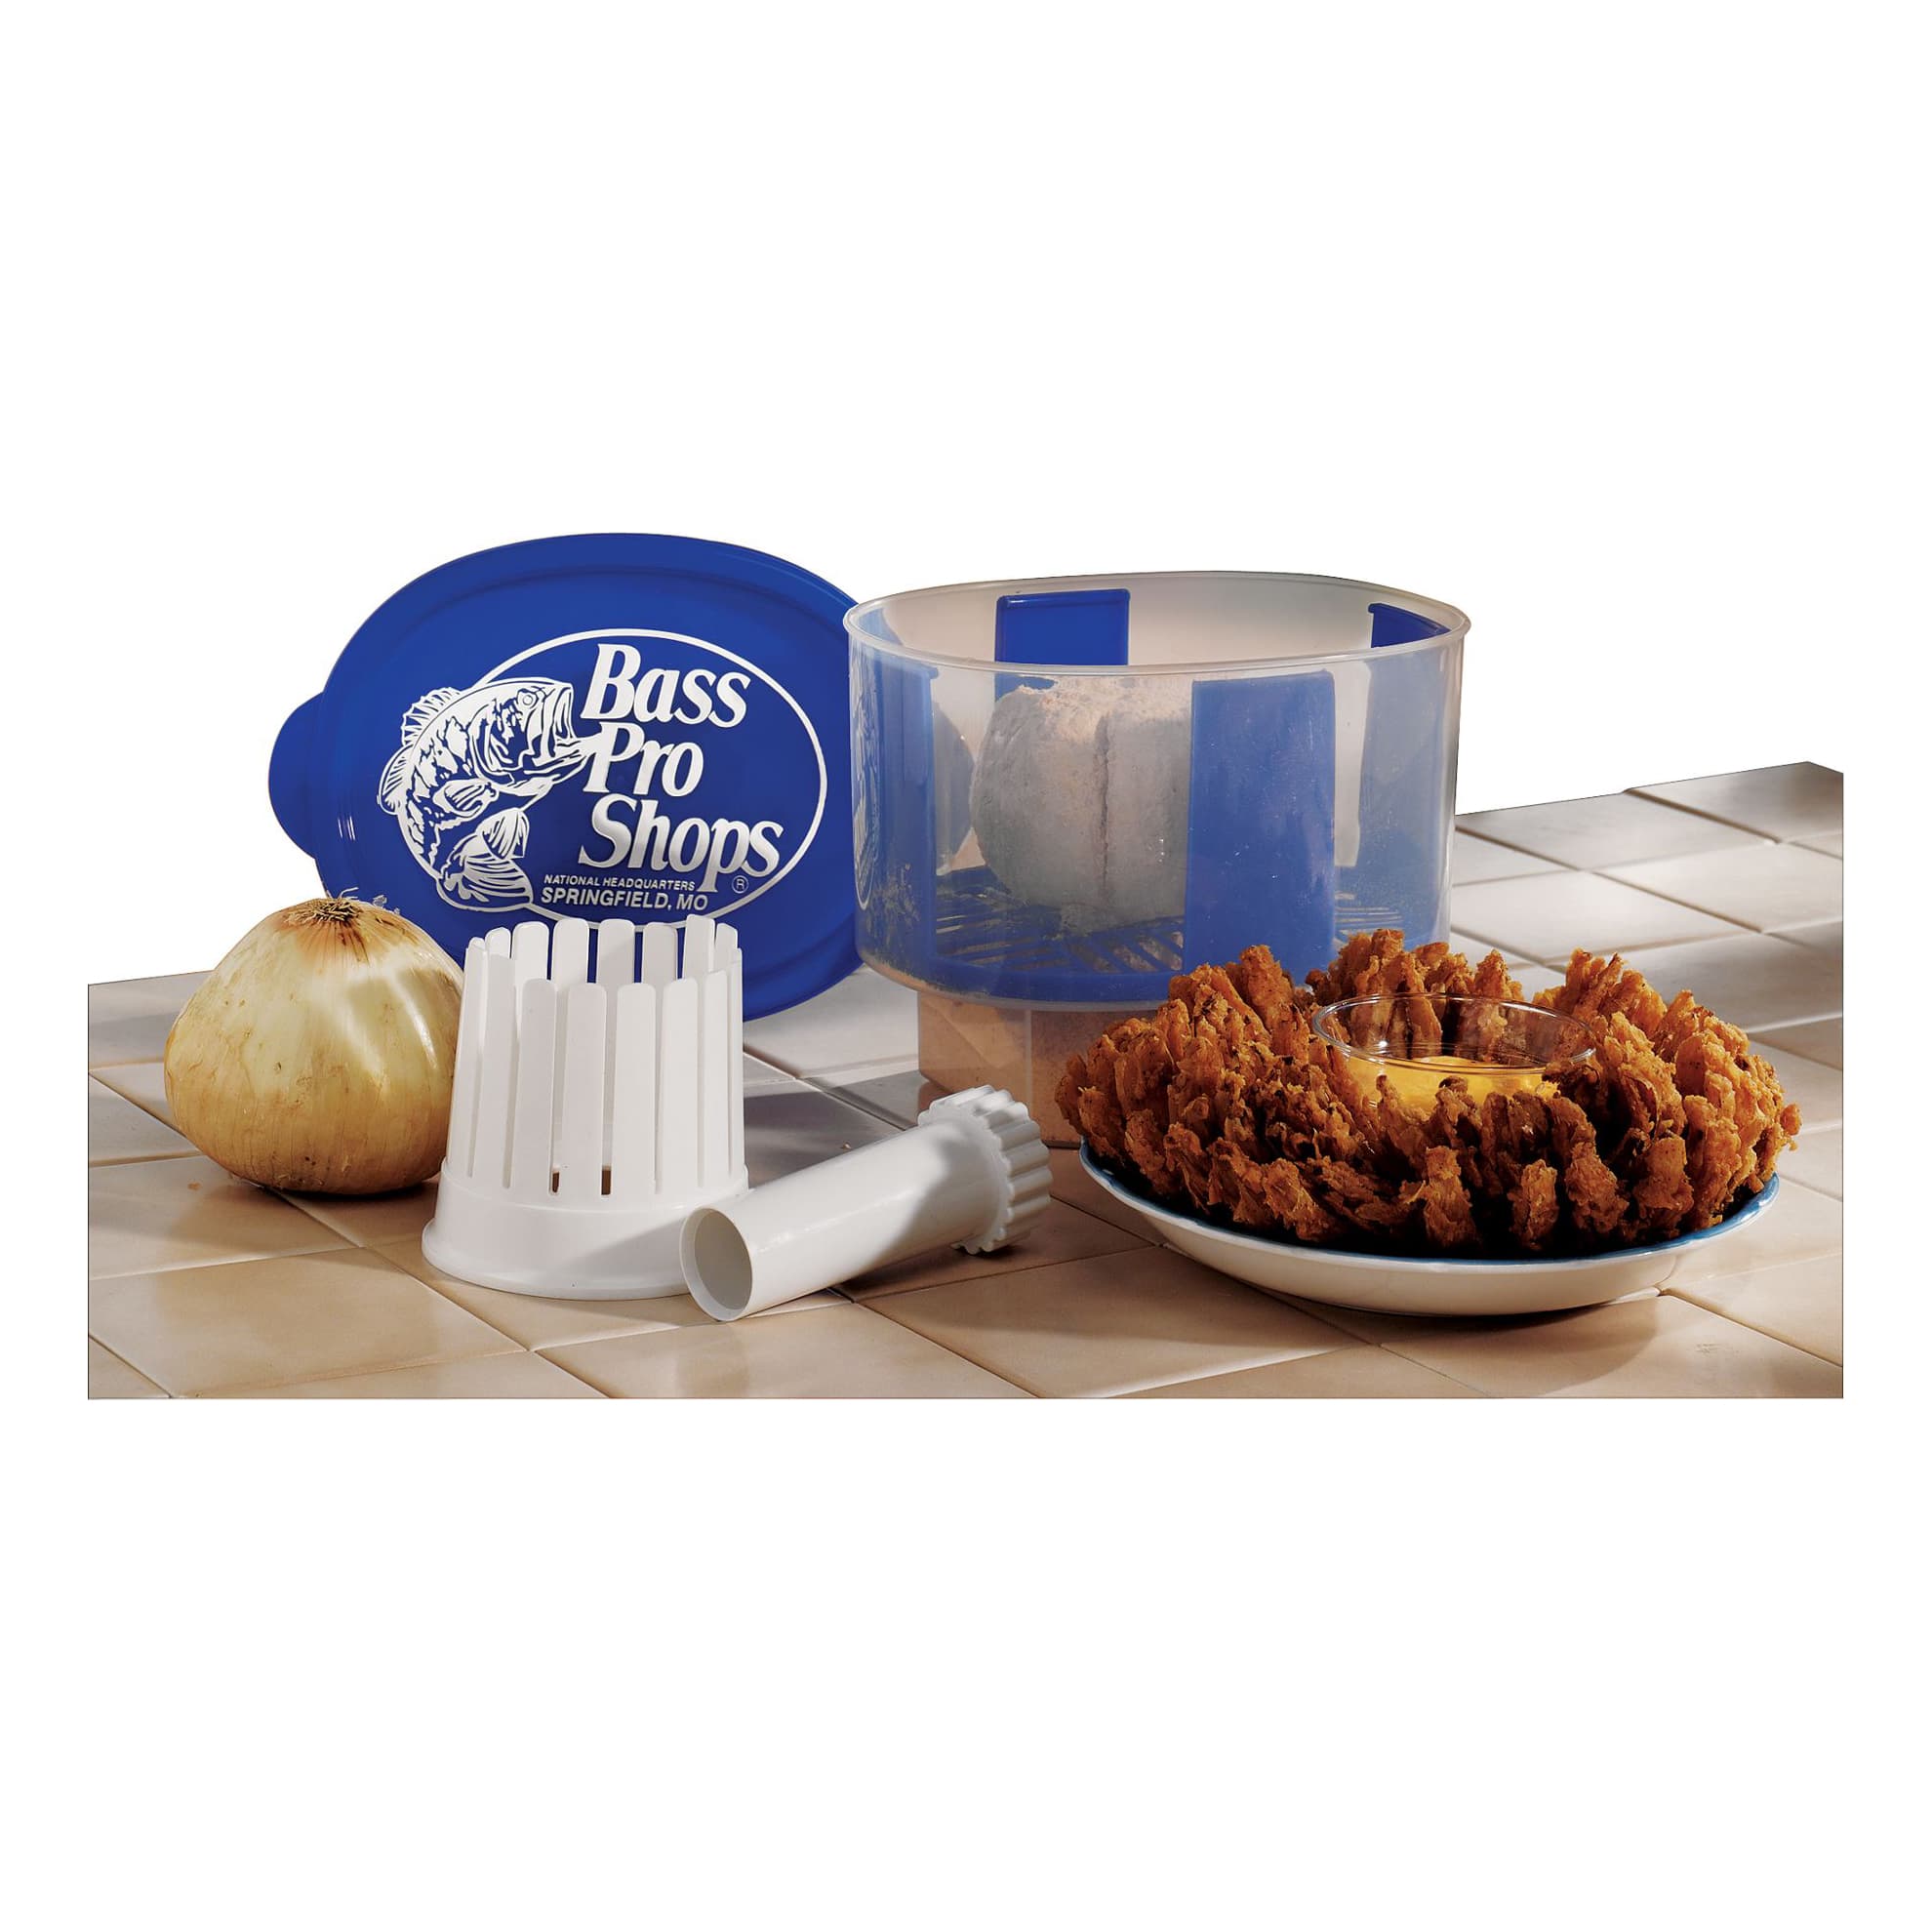 Blooming Onion Cutter Blossom Maker Set with Bread Batter Bowl Kit